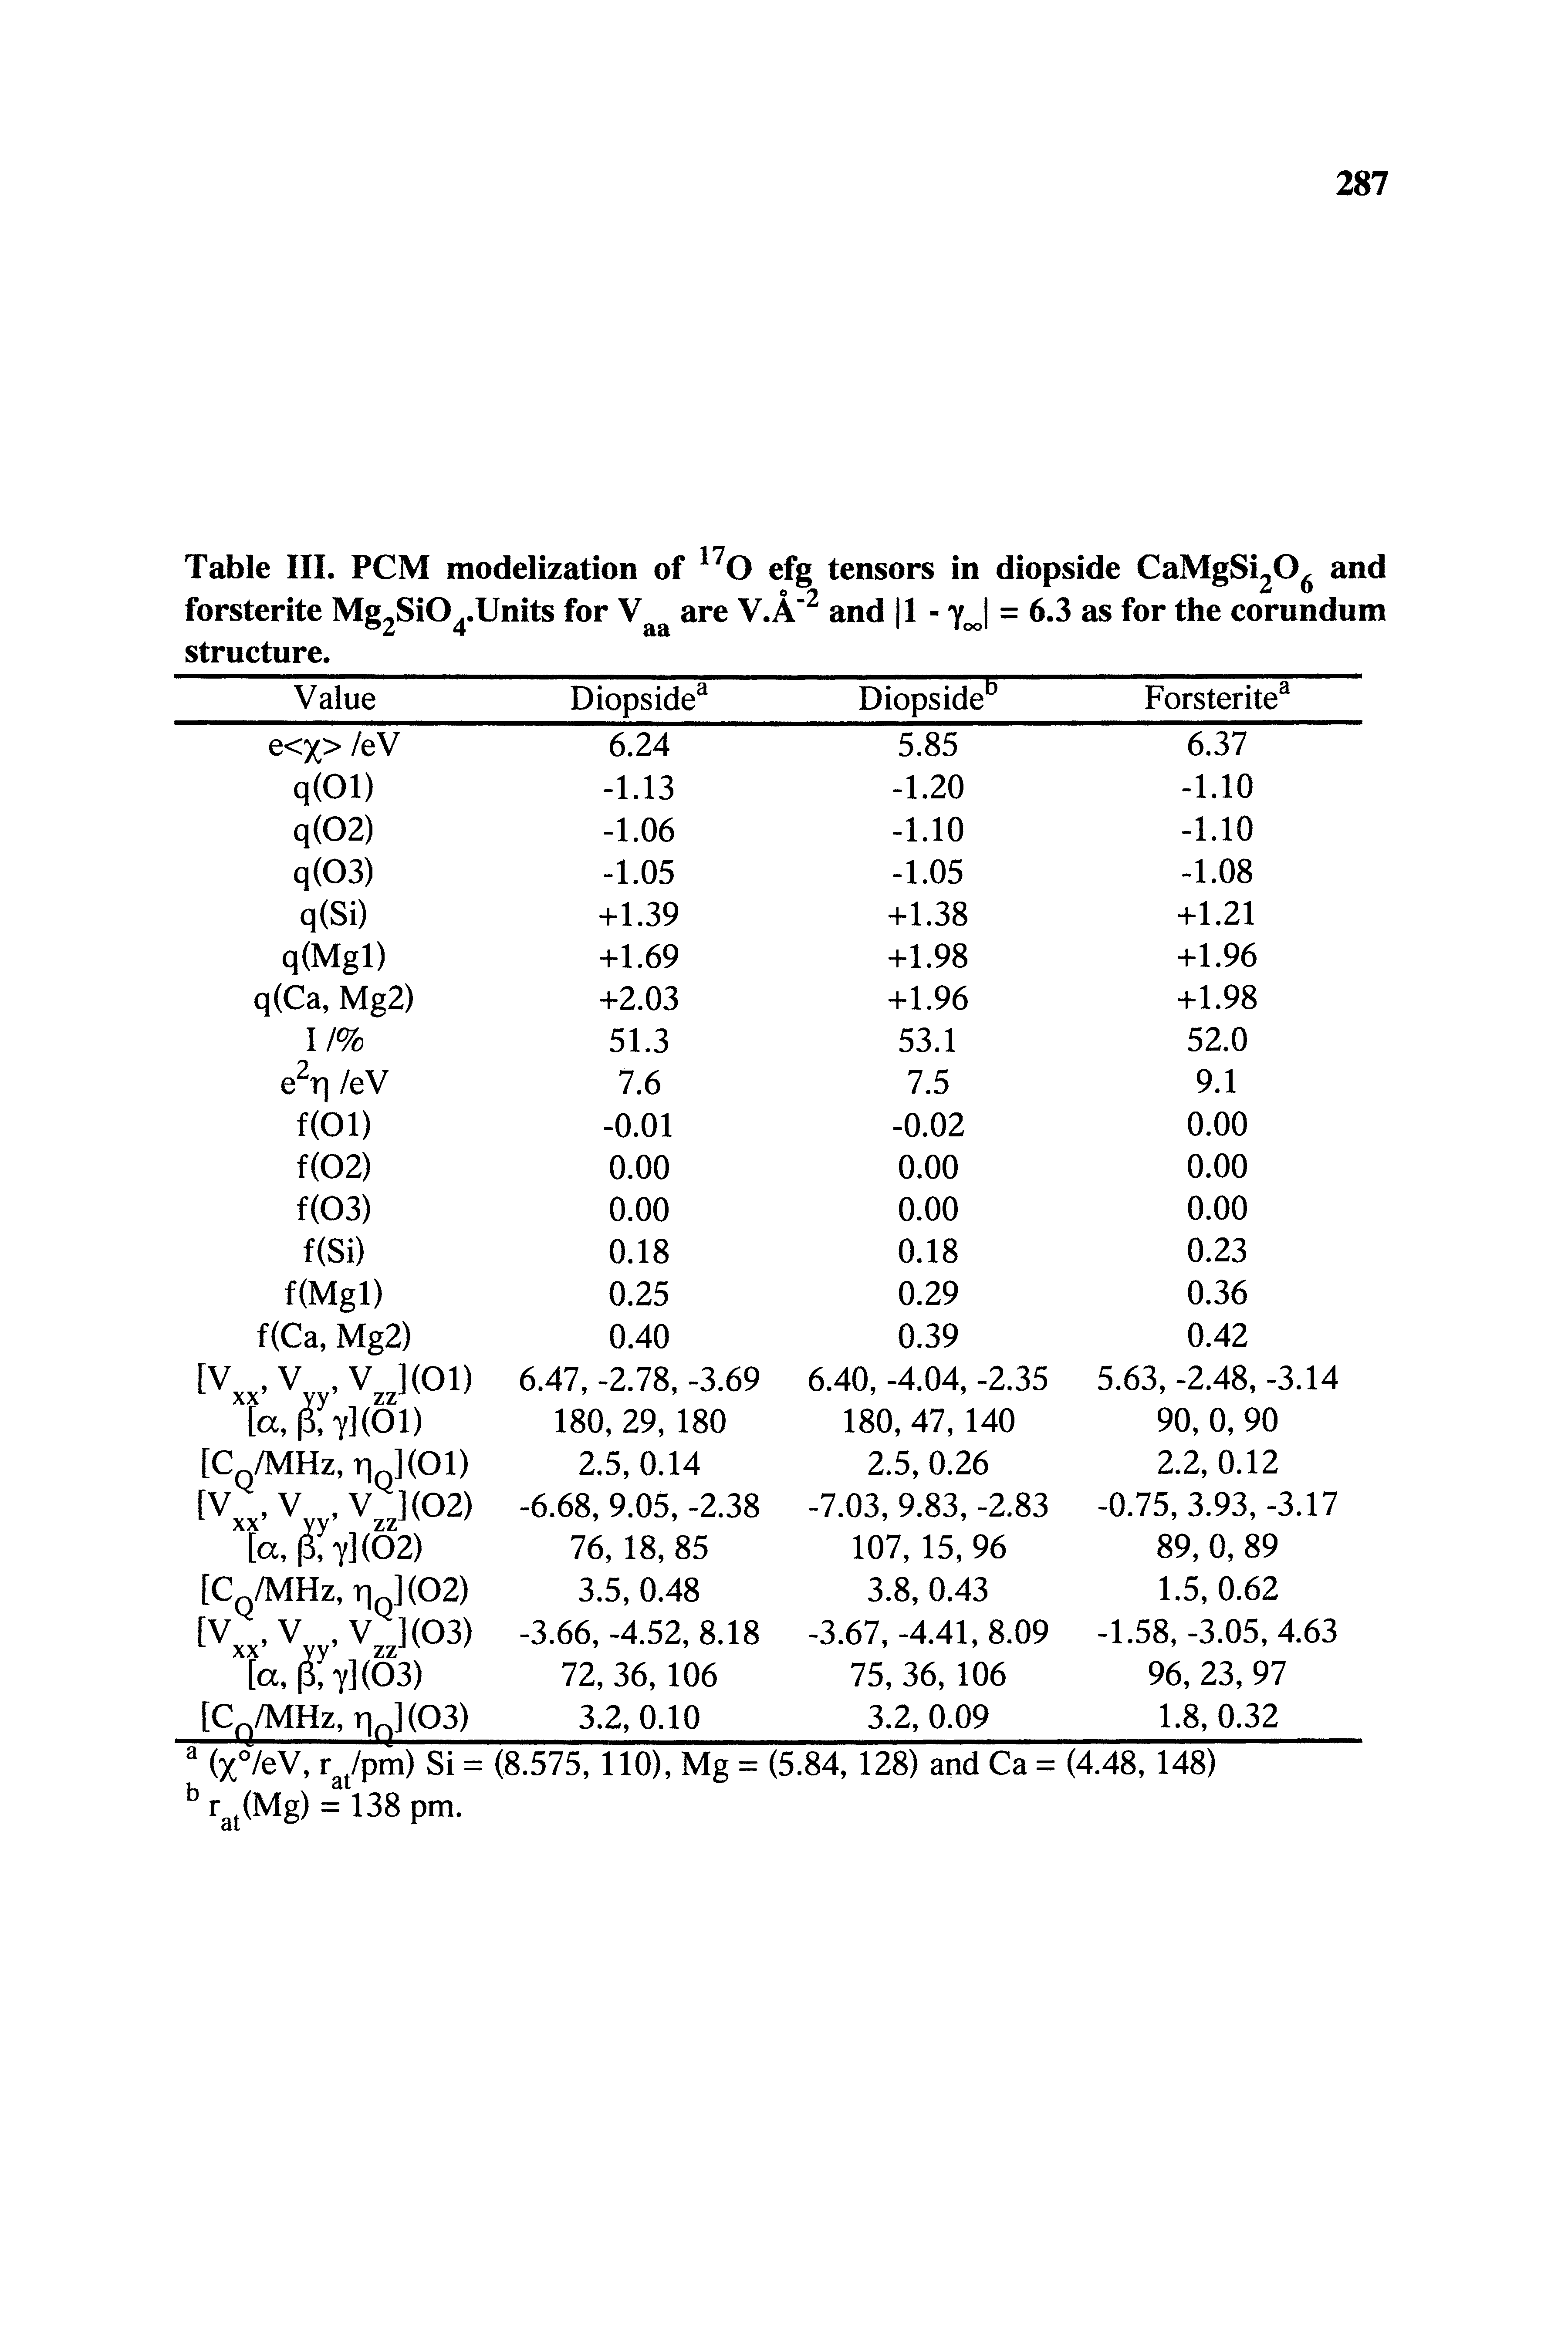 Table III. PCM modelization of 170 efg tensors in diopside CaMgSi206 and forsterite Mg2Si04.Units for Vaa are V.A"2 and 1 - yj = 6.3 as for the corundum structure.